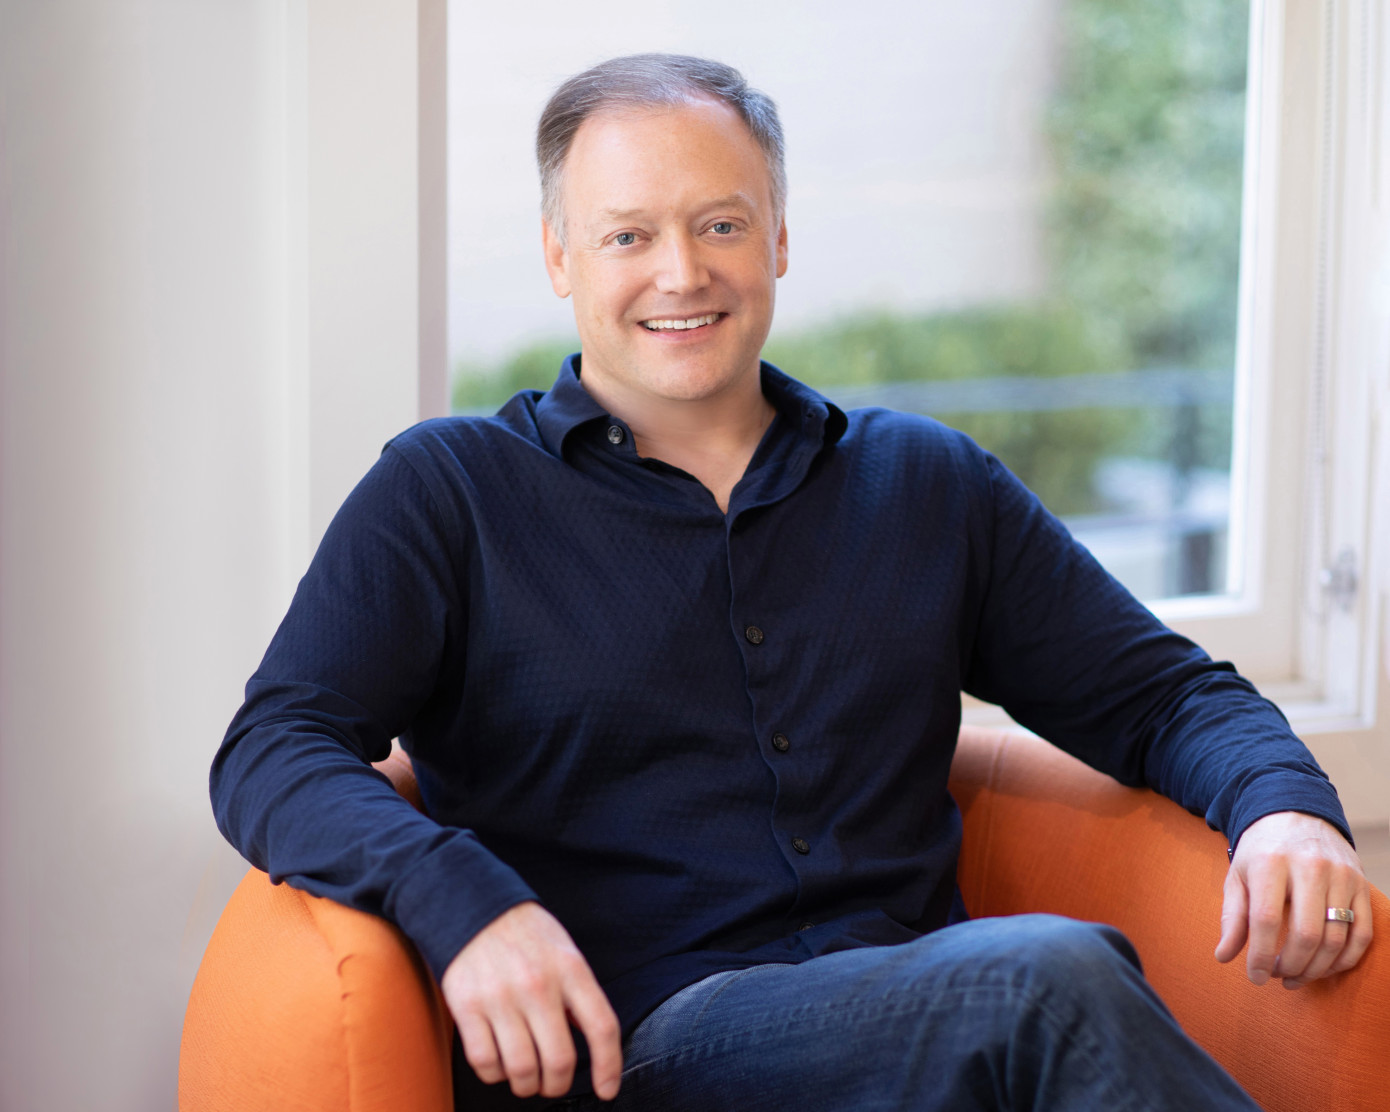 Former Dropbox CTO Quentin Clark just joined General Catalyst as a managing director